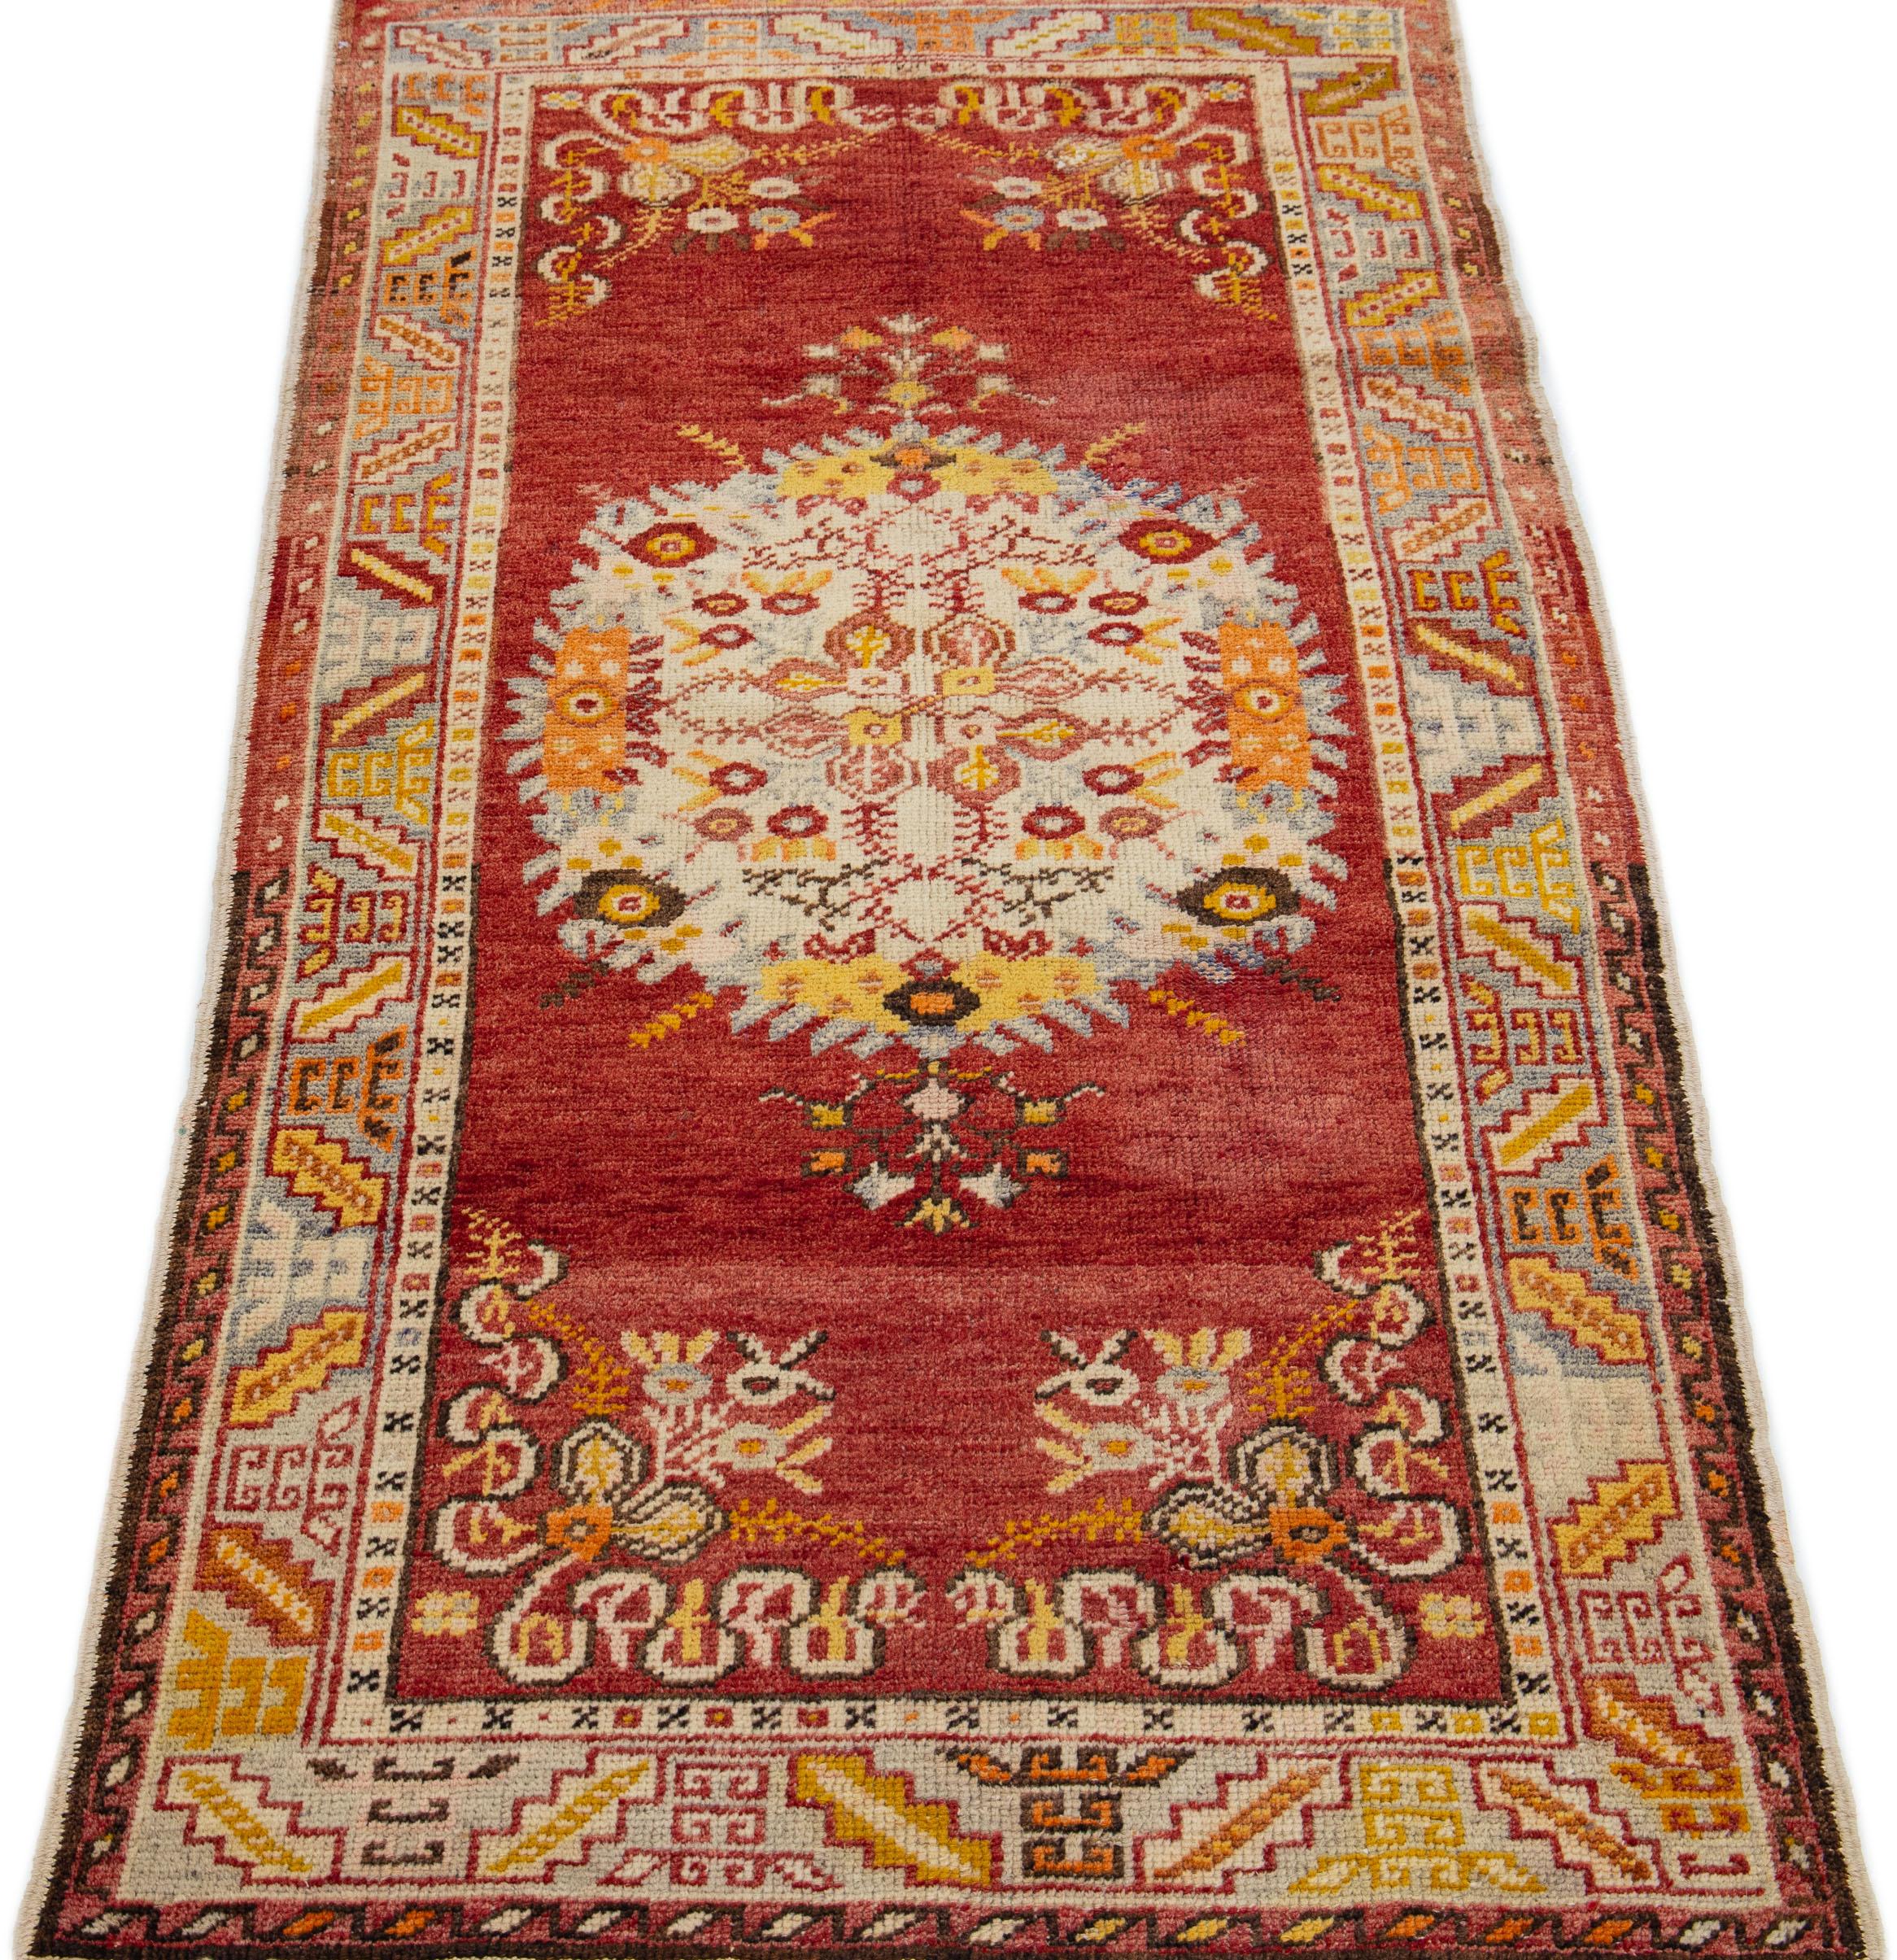 This 20th century Khotan rug is an antique piece featuring a red field and center medallion adorned with multicolor accents.

This rug measures 2'11